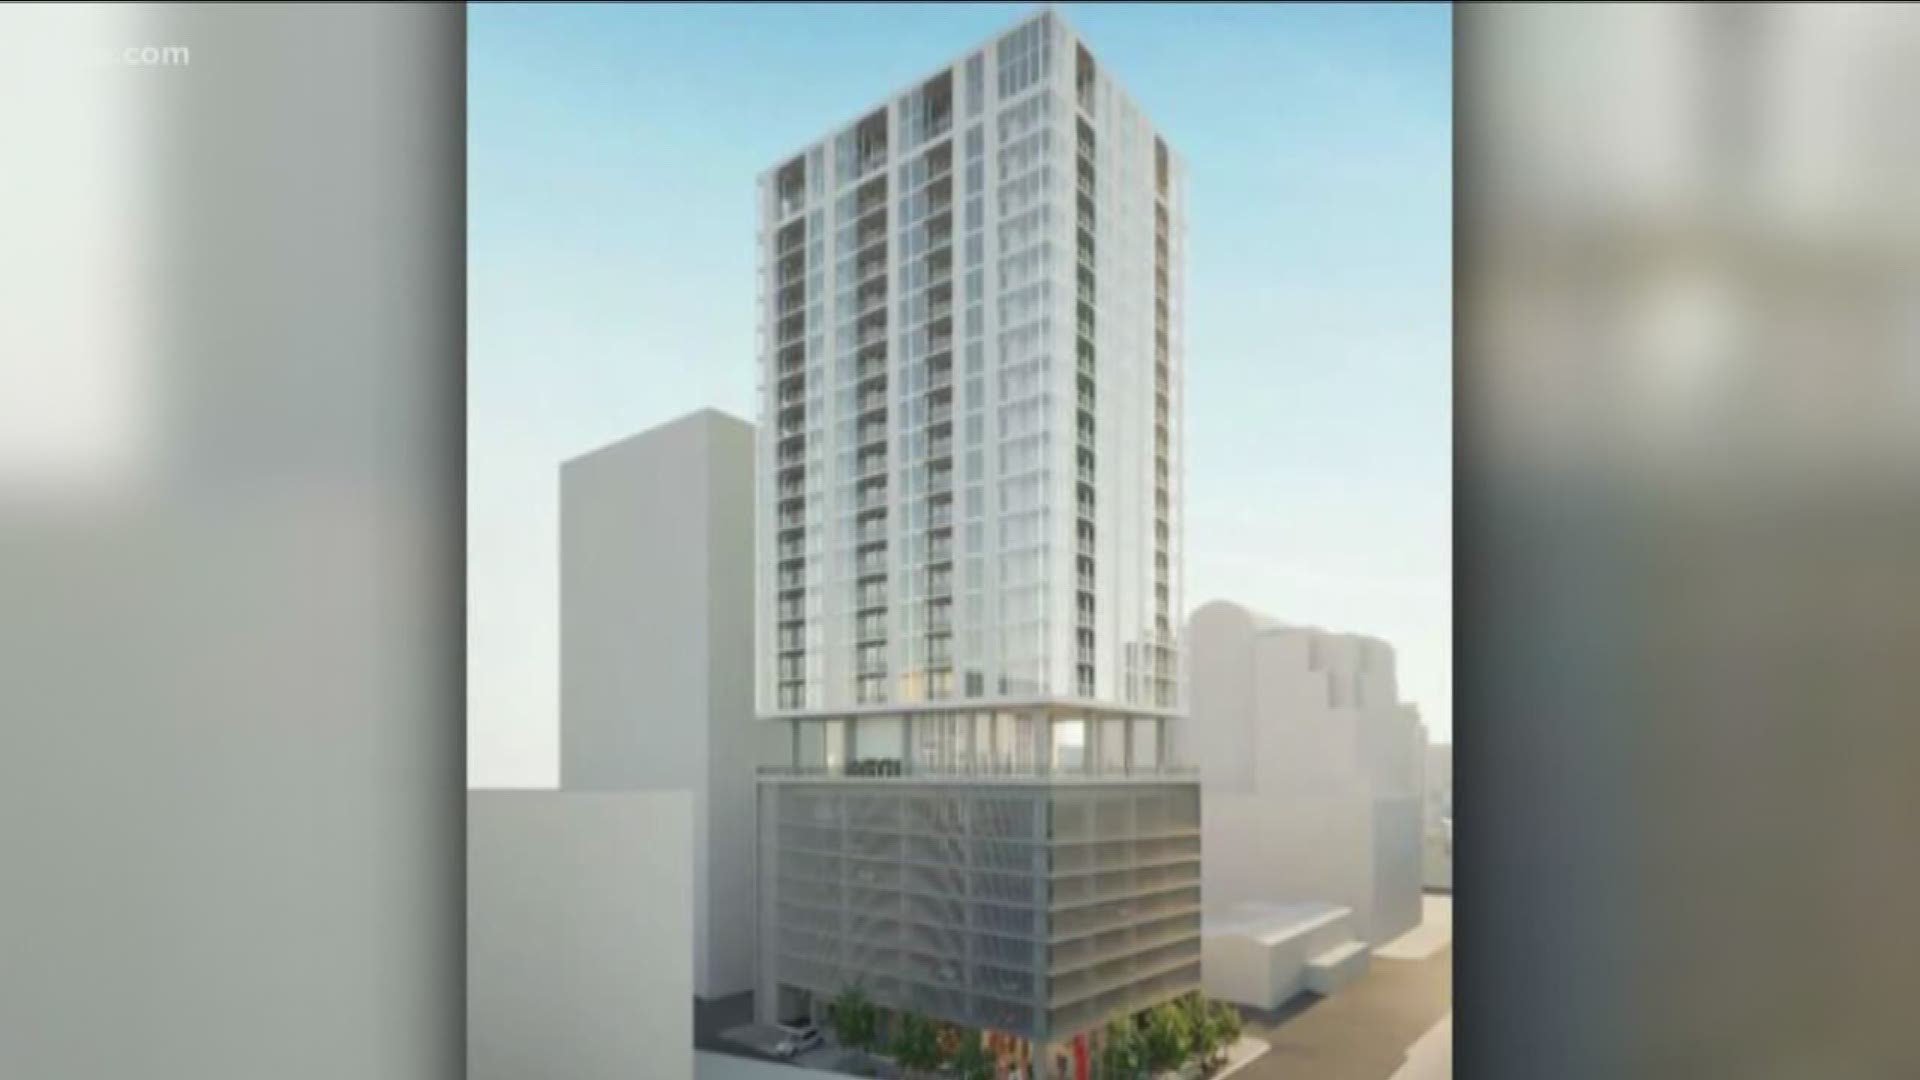 The 'Linden' will have 117 luxury condos ranging from one to three-bedroom units.